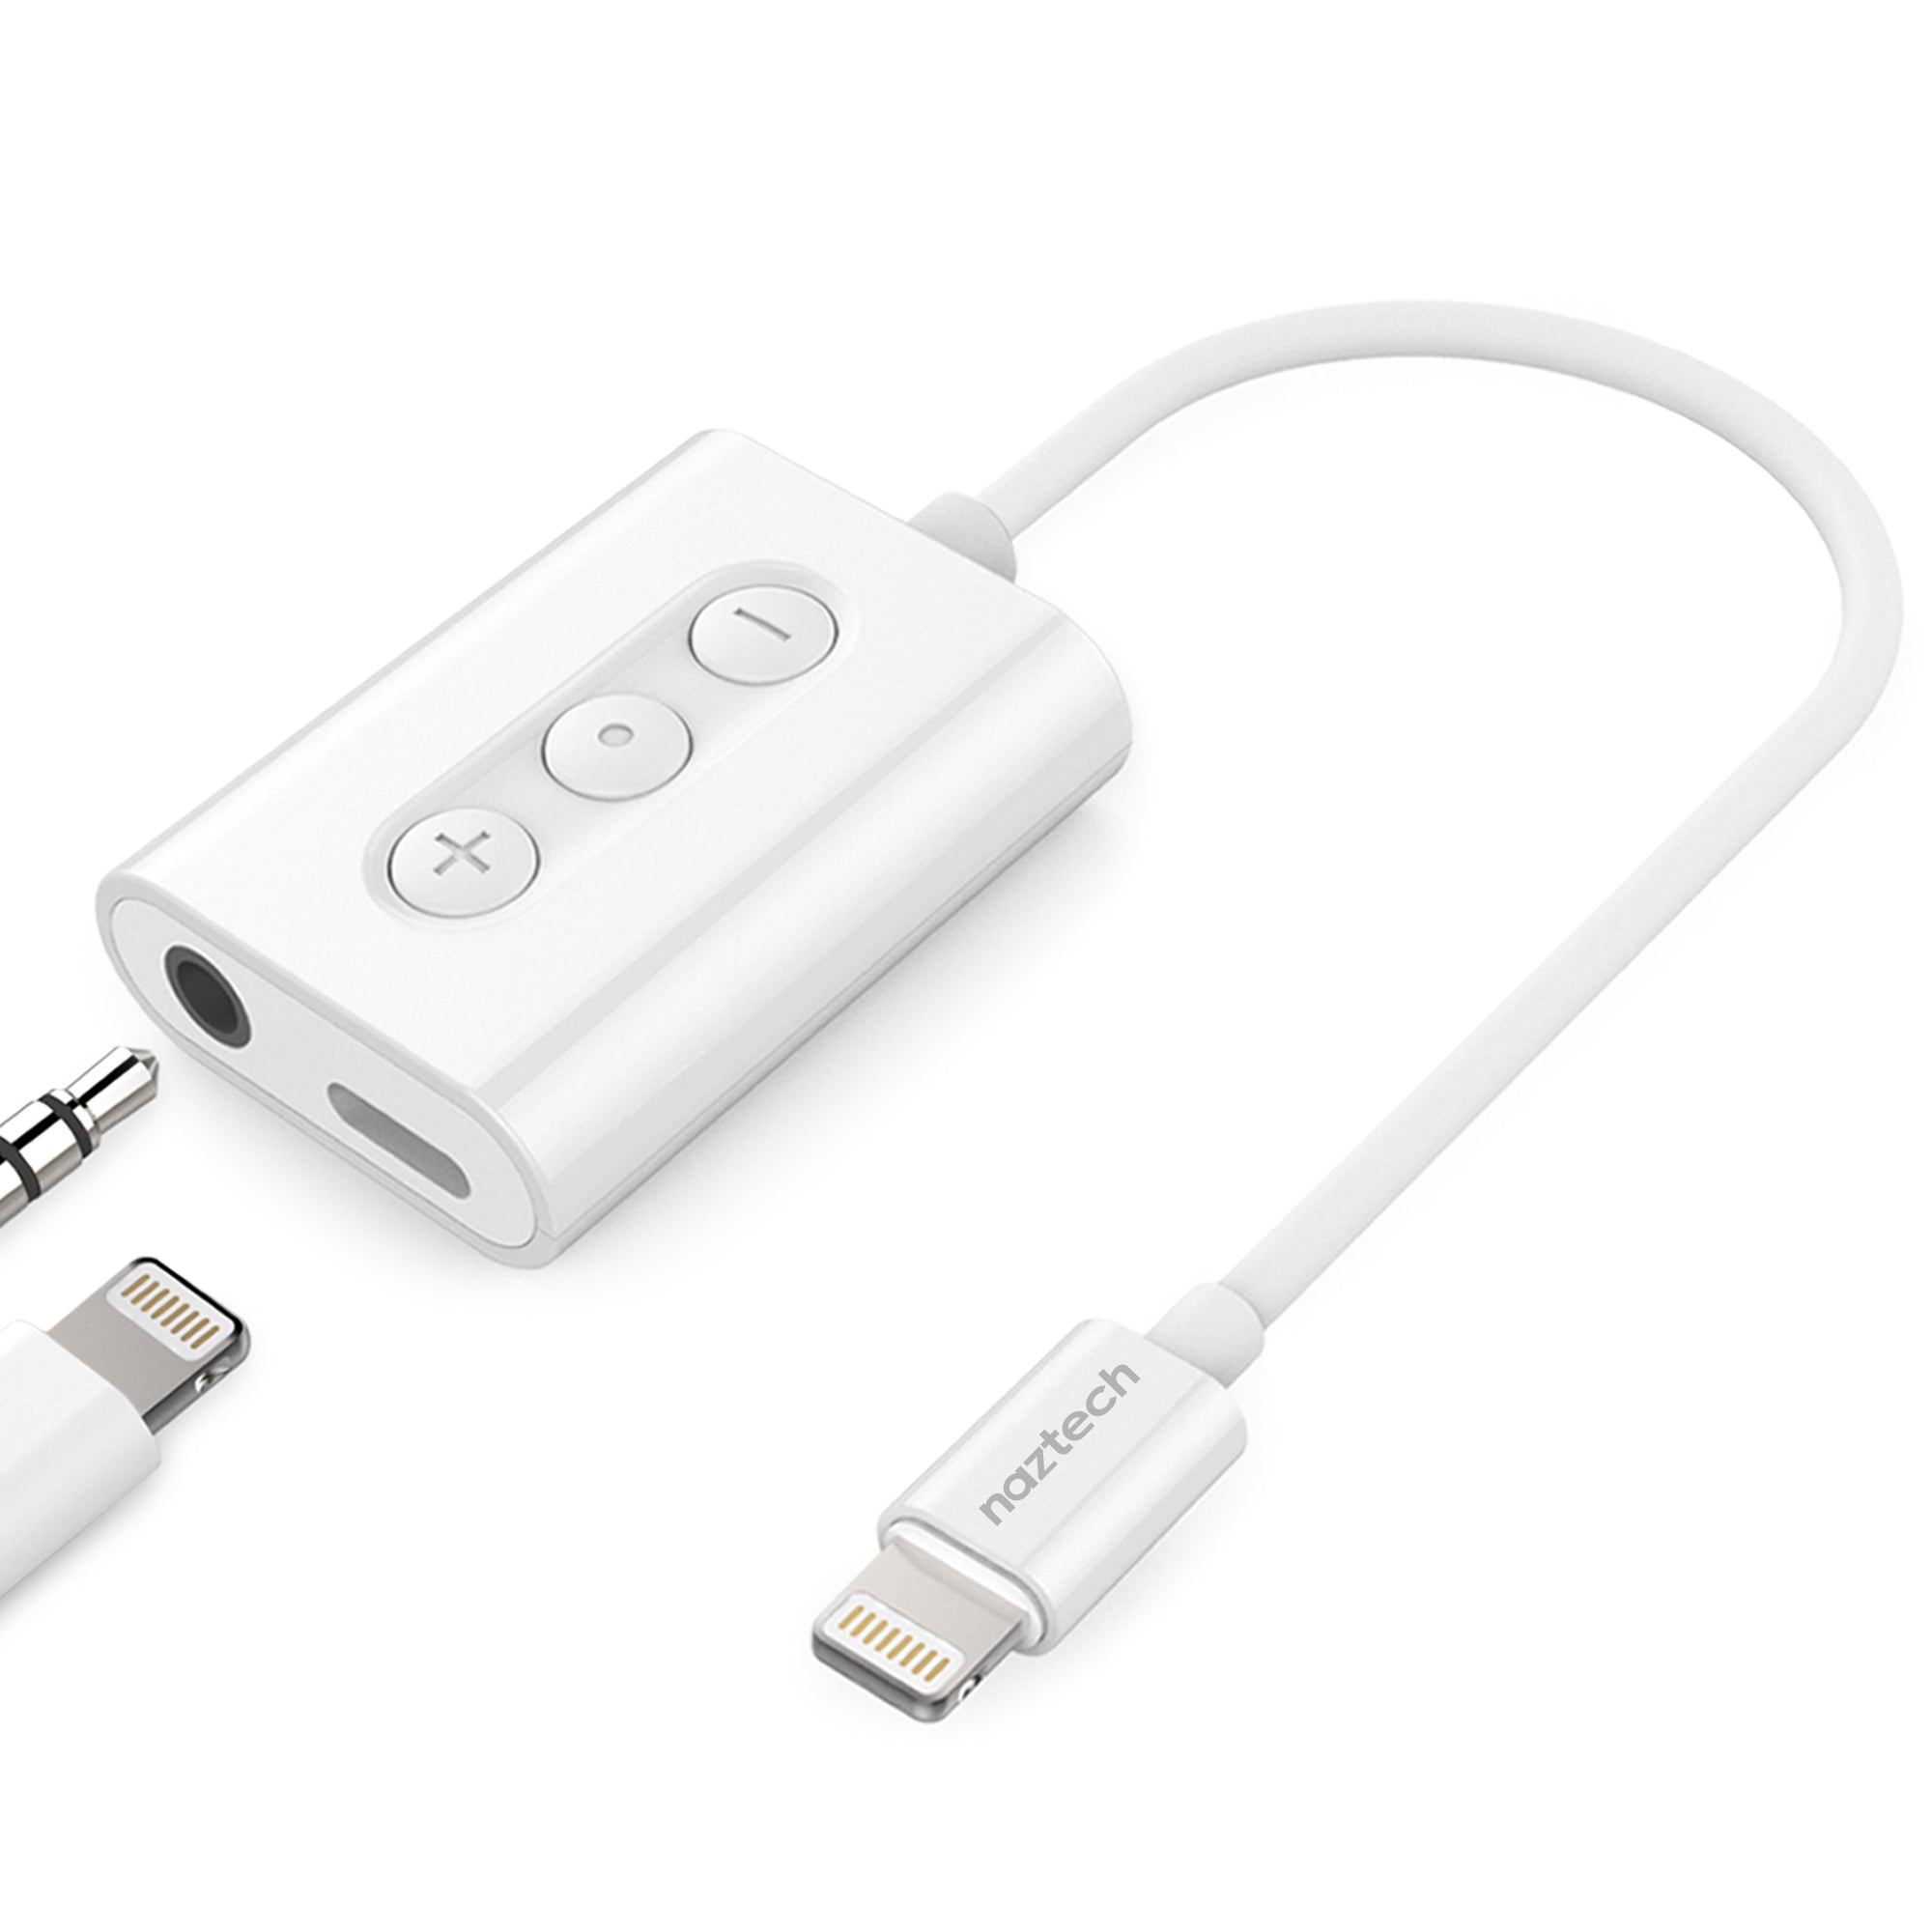 Arthur Conan Doyle Reembolso limpiar iPhone Charger and Headphone Adapter | Naztech – Naztech.com